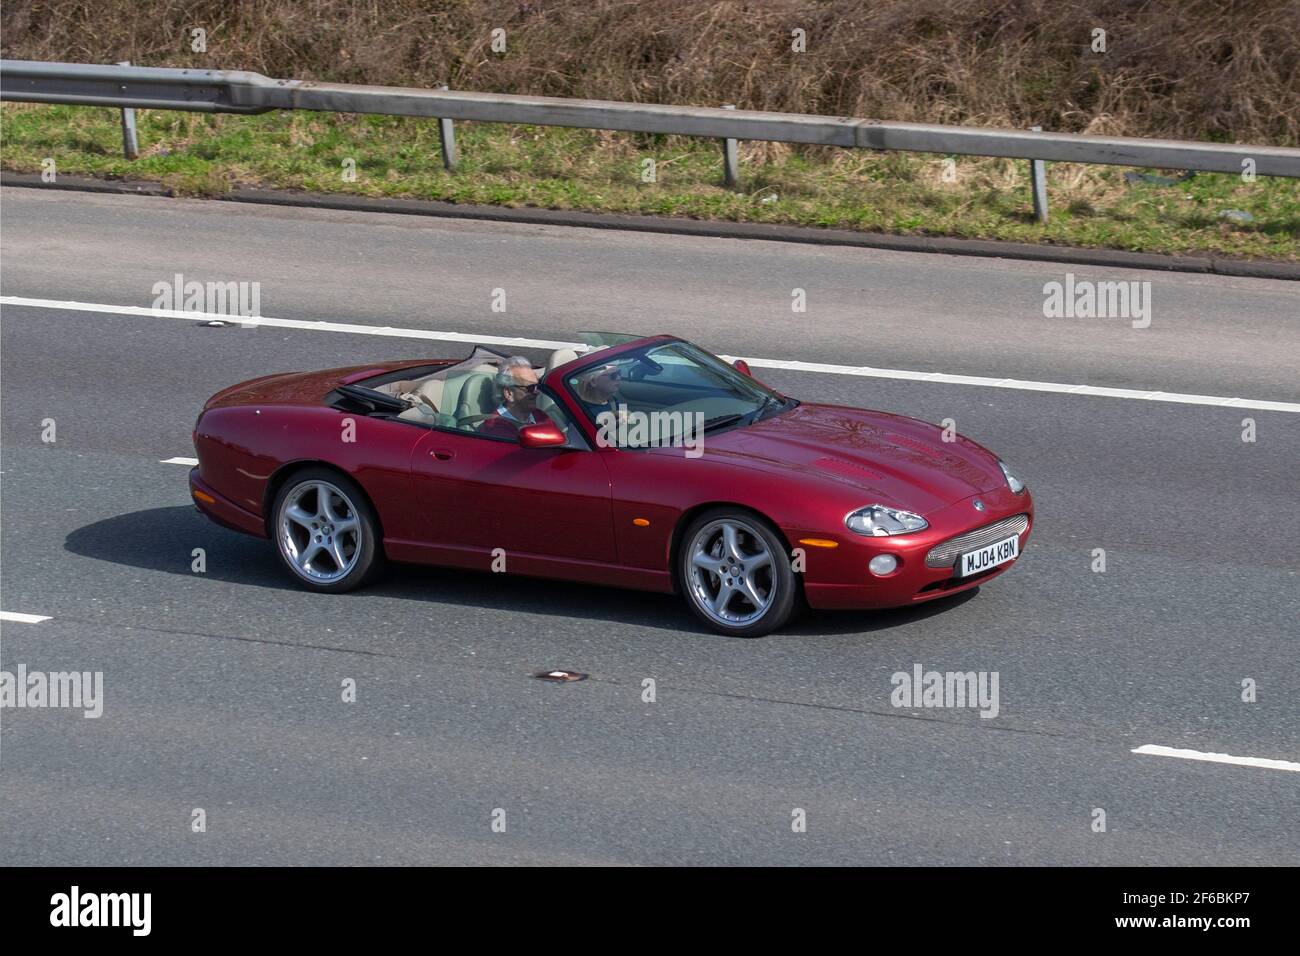 2004 04plate red Jaguar Xkr Convertible Auto 4196cc petrol cabriolet; Vehicular traffic, moving vehicles, cars, vehicle driving on UK roads, motors, motoring on the M6 highway English motorway road network Stock Photo